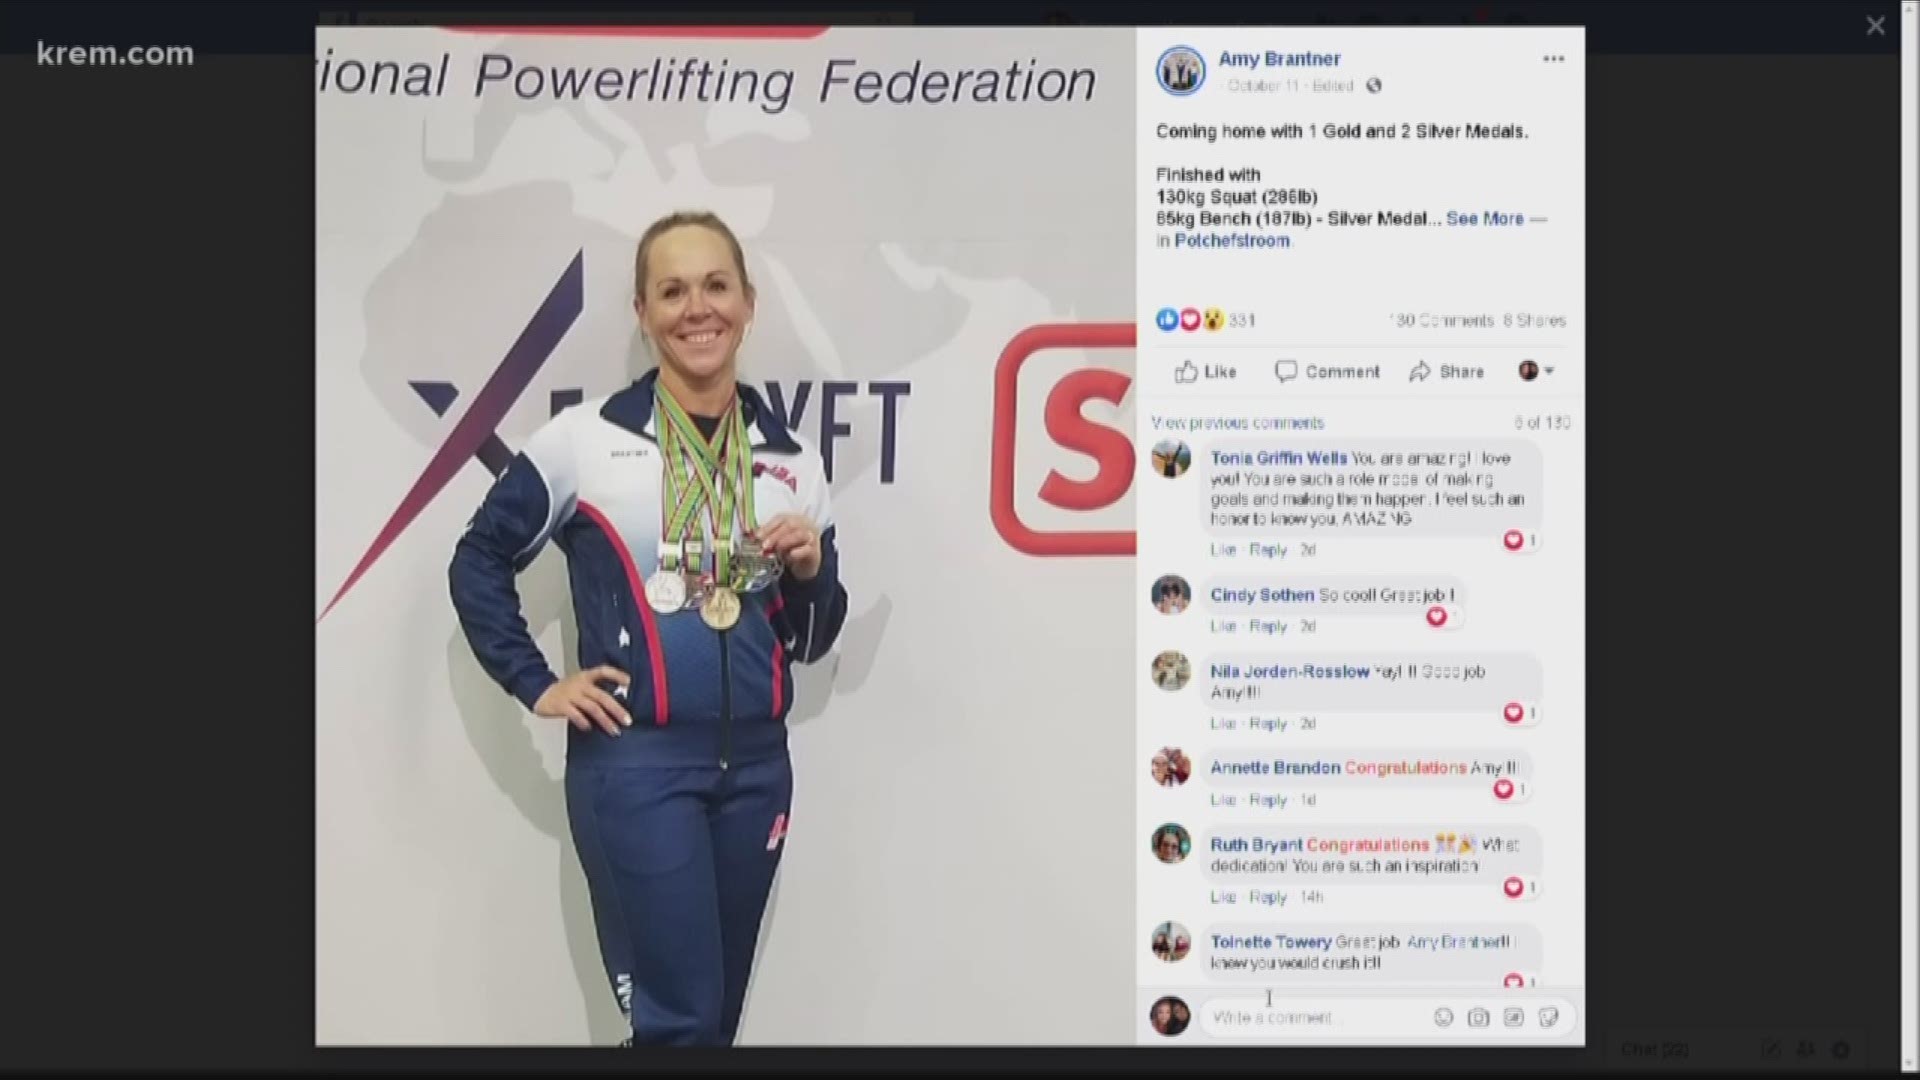 Spokane's own Amy Brantner emerged victorious after turning in another stellar performance. She won two silver medals and a gold medal in South Africa.